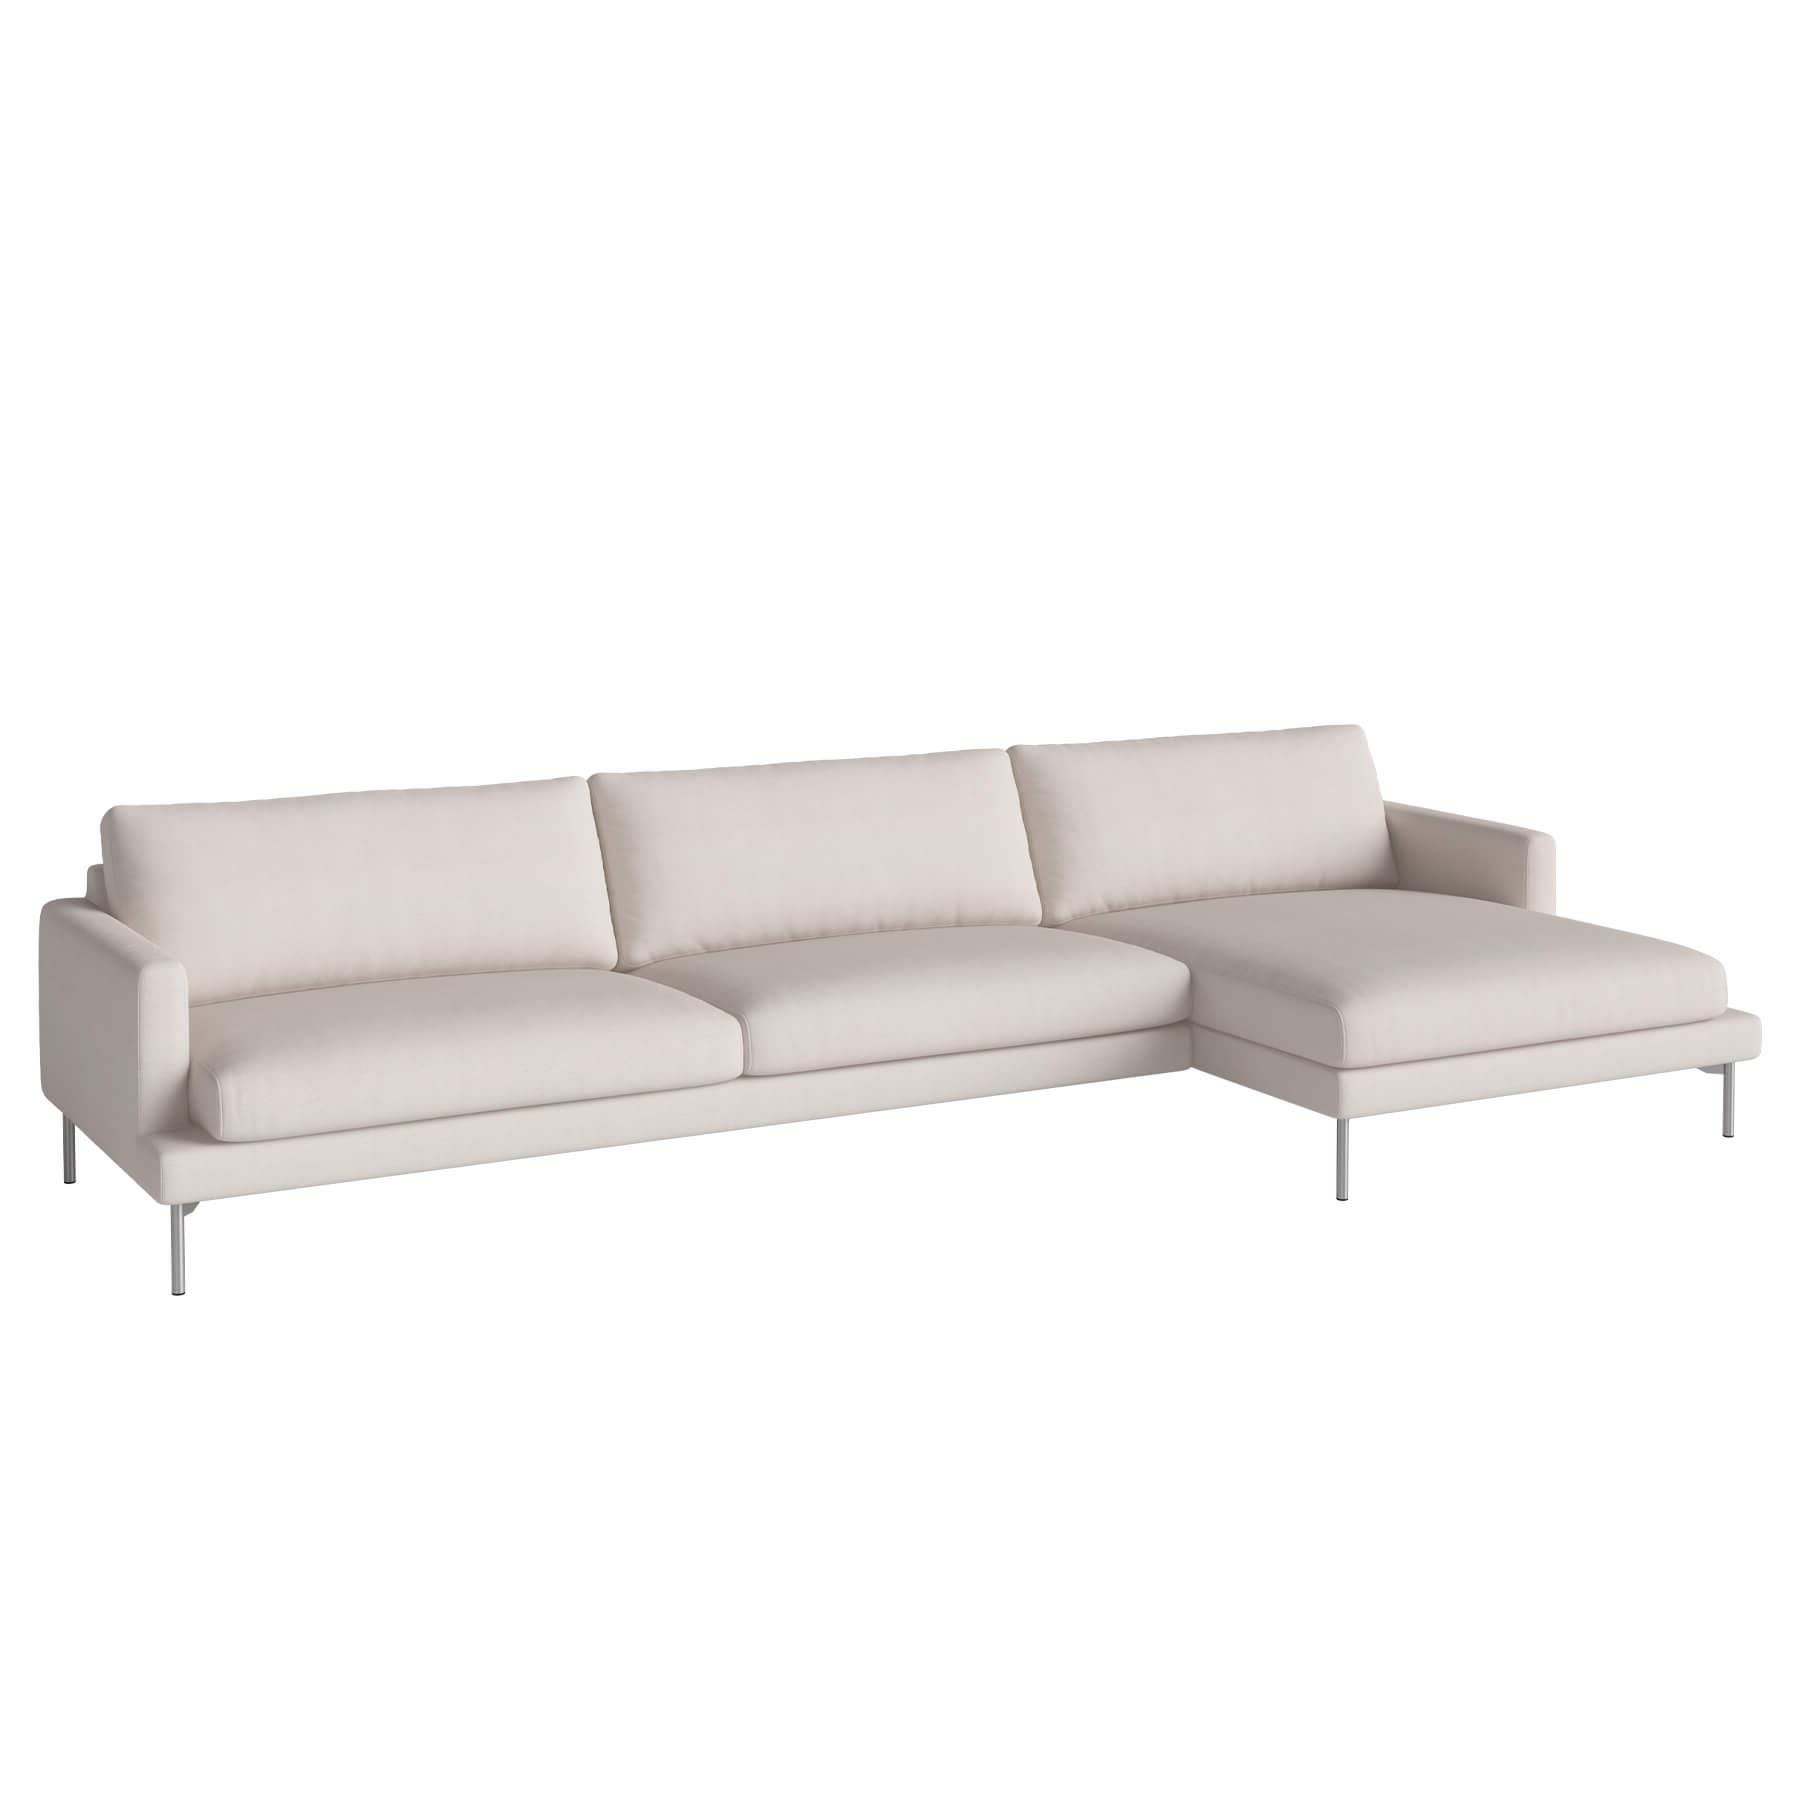 Bolia Veneda Sofa 45 Seater Sofa With Chaise Longue Brushed Steel Linea Beige Right Brown Designer Furniture From Holloways Of Ludlow